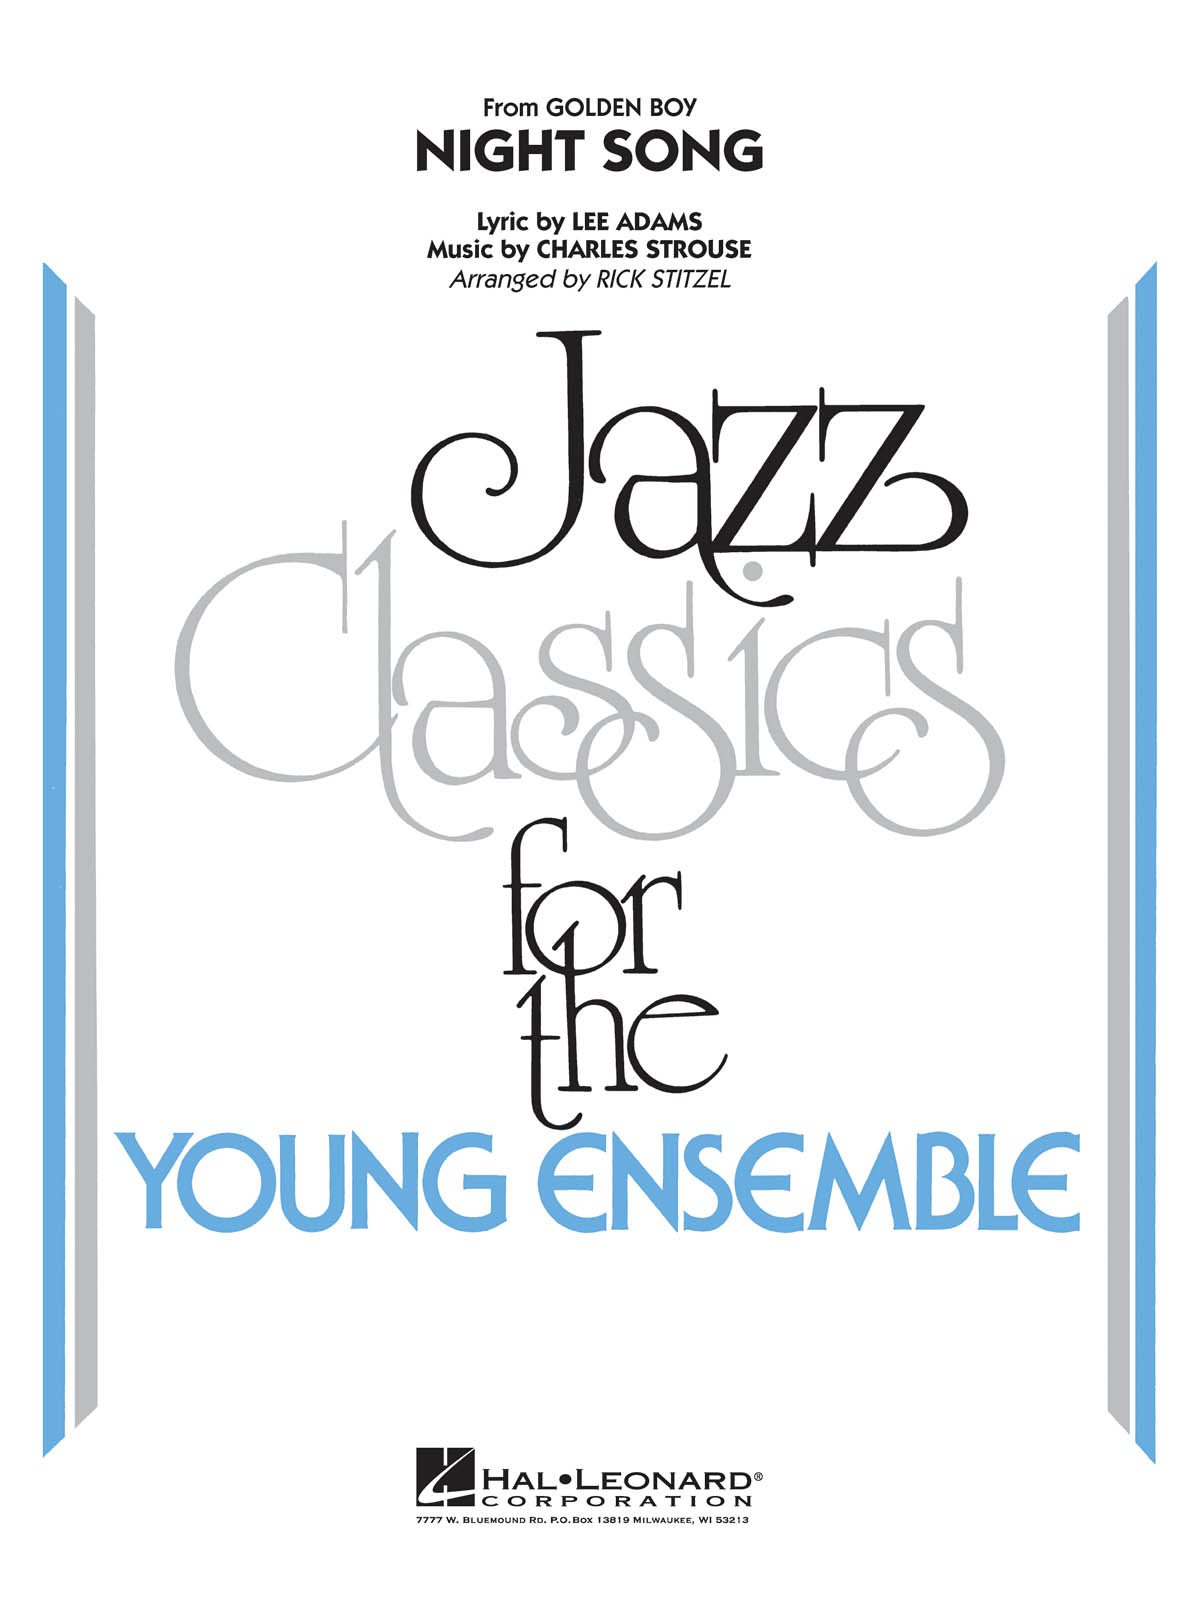 Charles Strouse: Night Song (from Golden Boy): Jazz Ensemble: Score